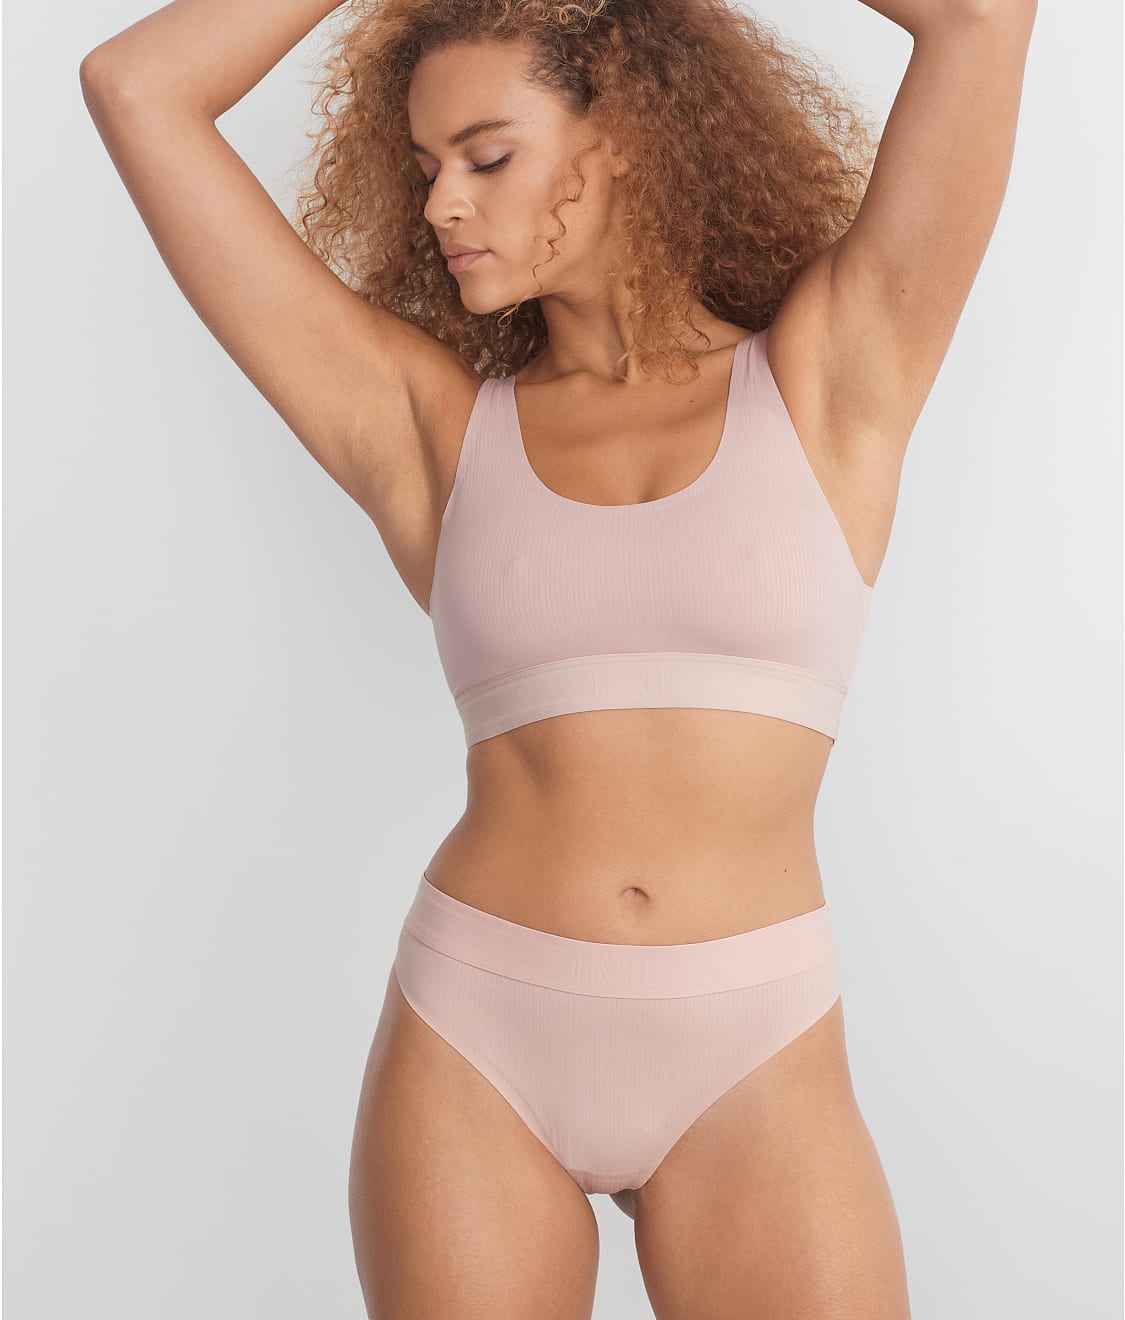 Wolford Shaping Athleisure Longline Plunge Bralette & Reviews